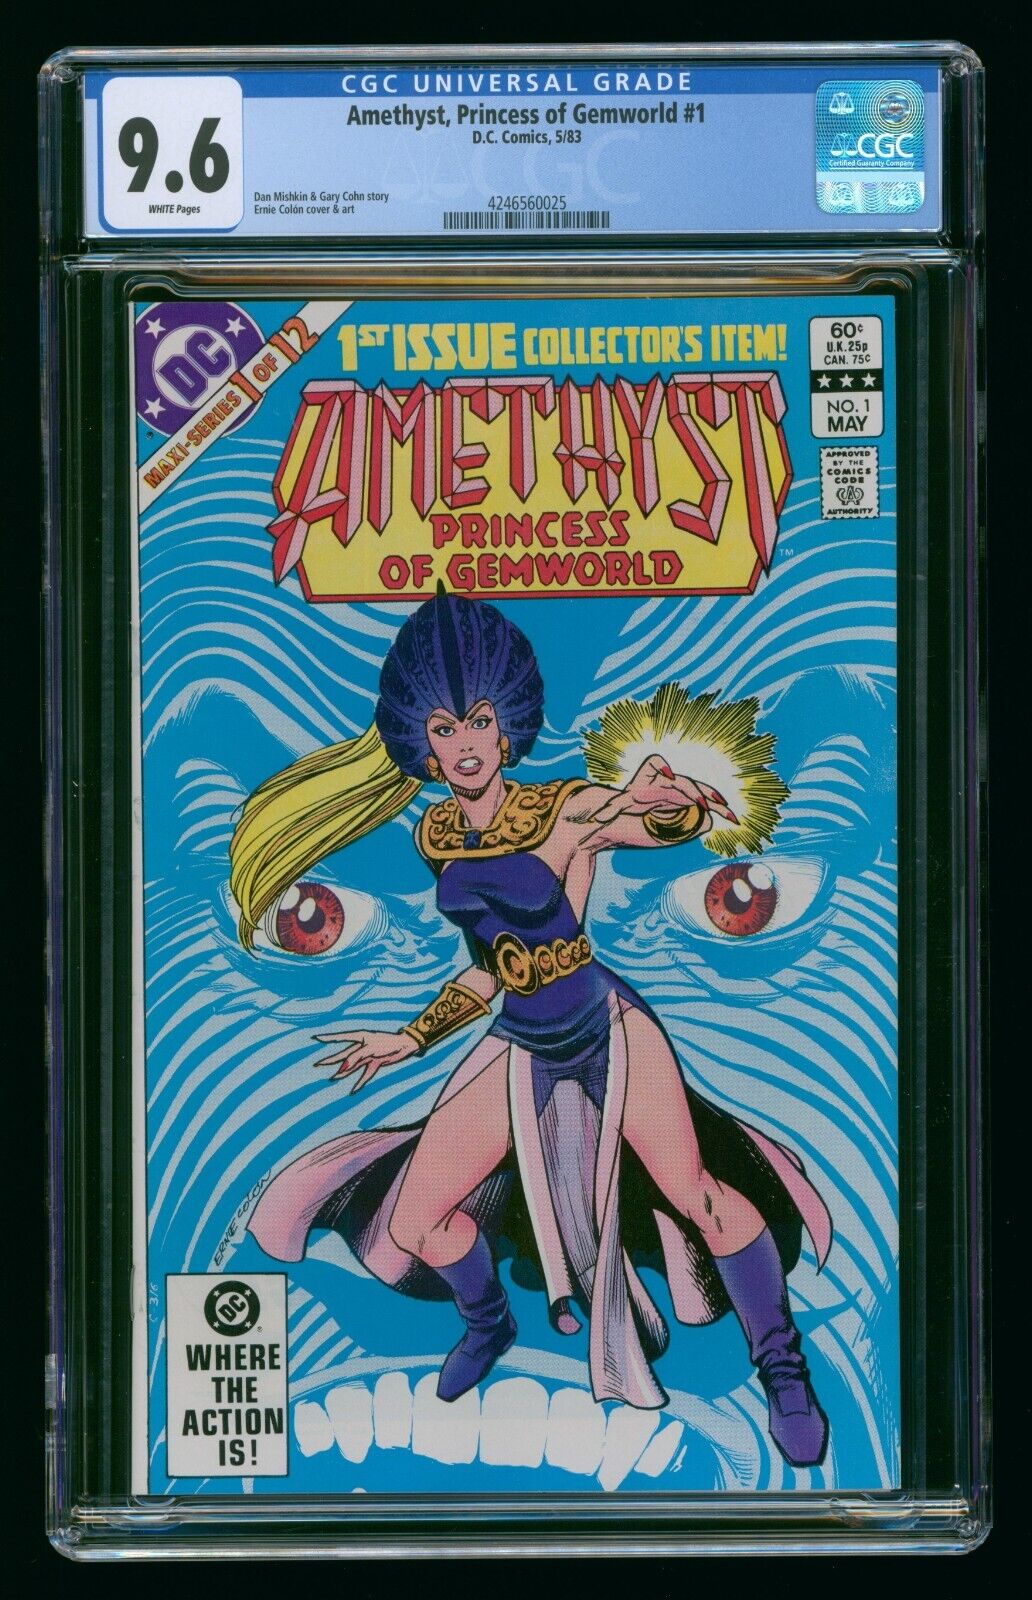 AMETHYST PRINCESS OF GEMWORLD #1 (1983) CGC 9.6 WHITE PAGES